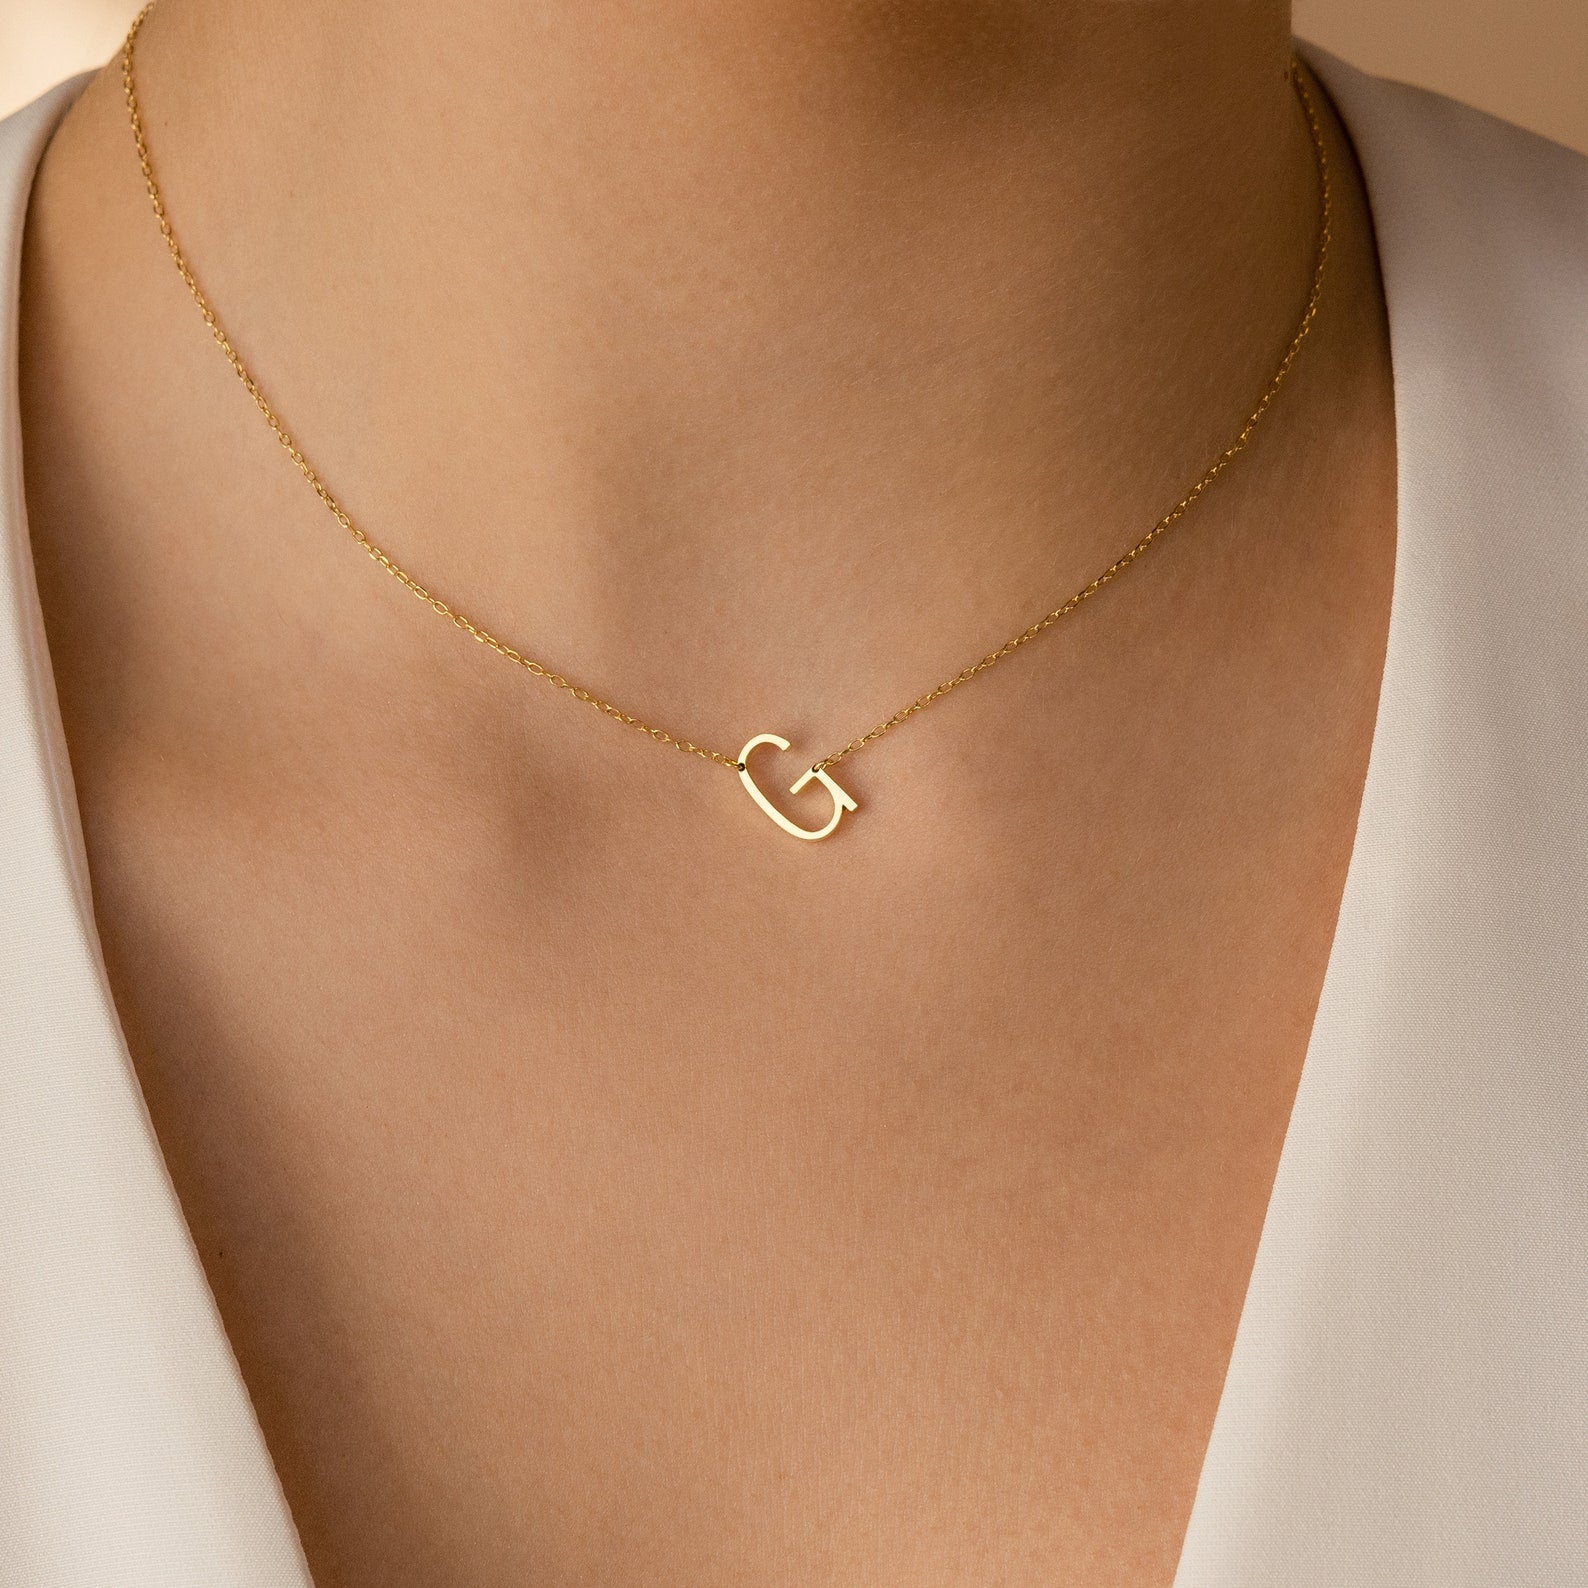 Buy Gold C Initial Necklace - 14K Gold Plated Sideways Large Initial  Necklace Stainless Steel Big Letter Necklace Monogram Necklace Oversized Initial  Necklace Jewelry Bridesmaids Gifts for Granddaughter at Amazon.in